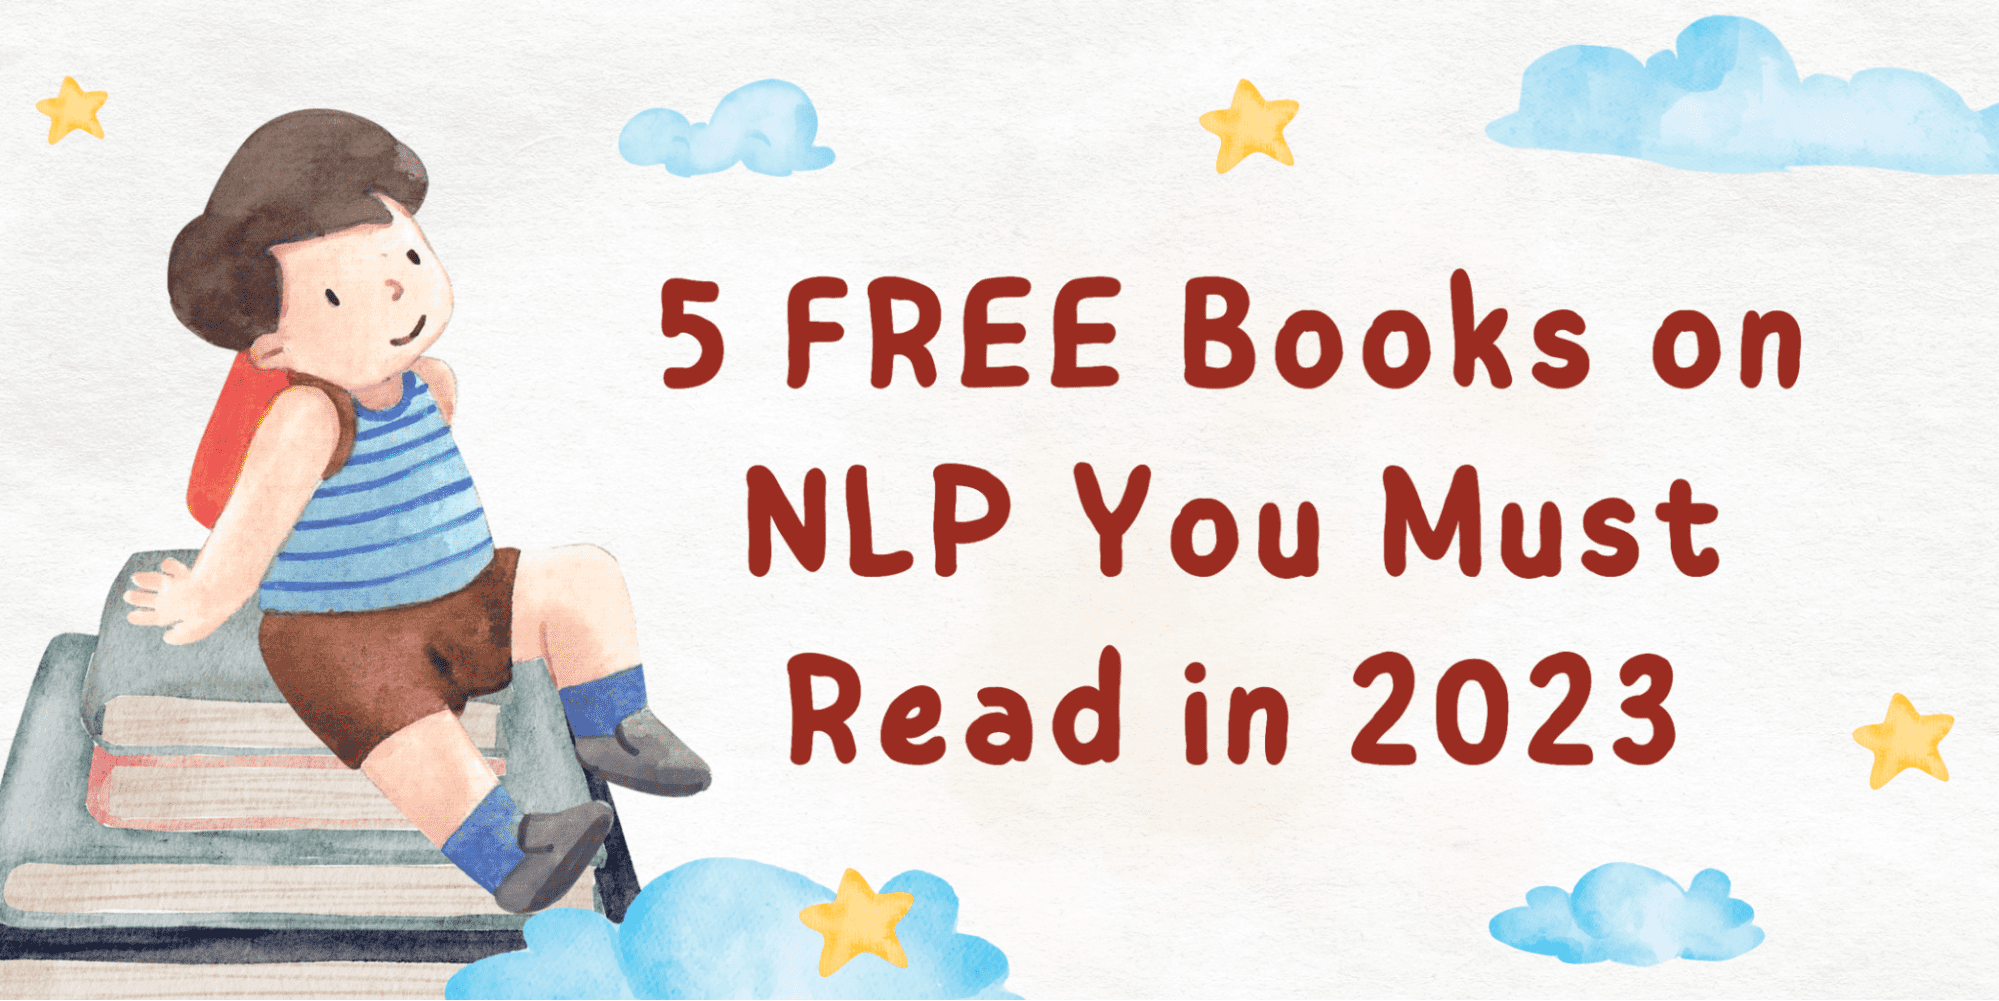 5 Free Books on Natural Language Processing to Read in 2023